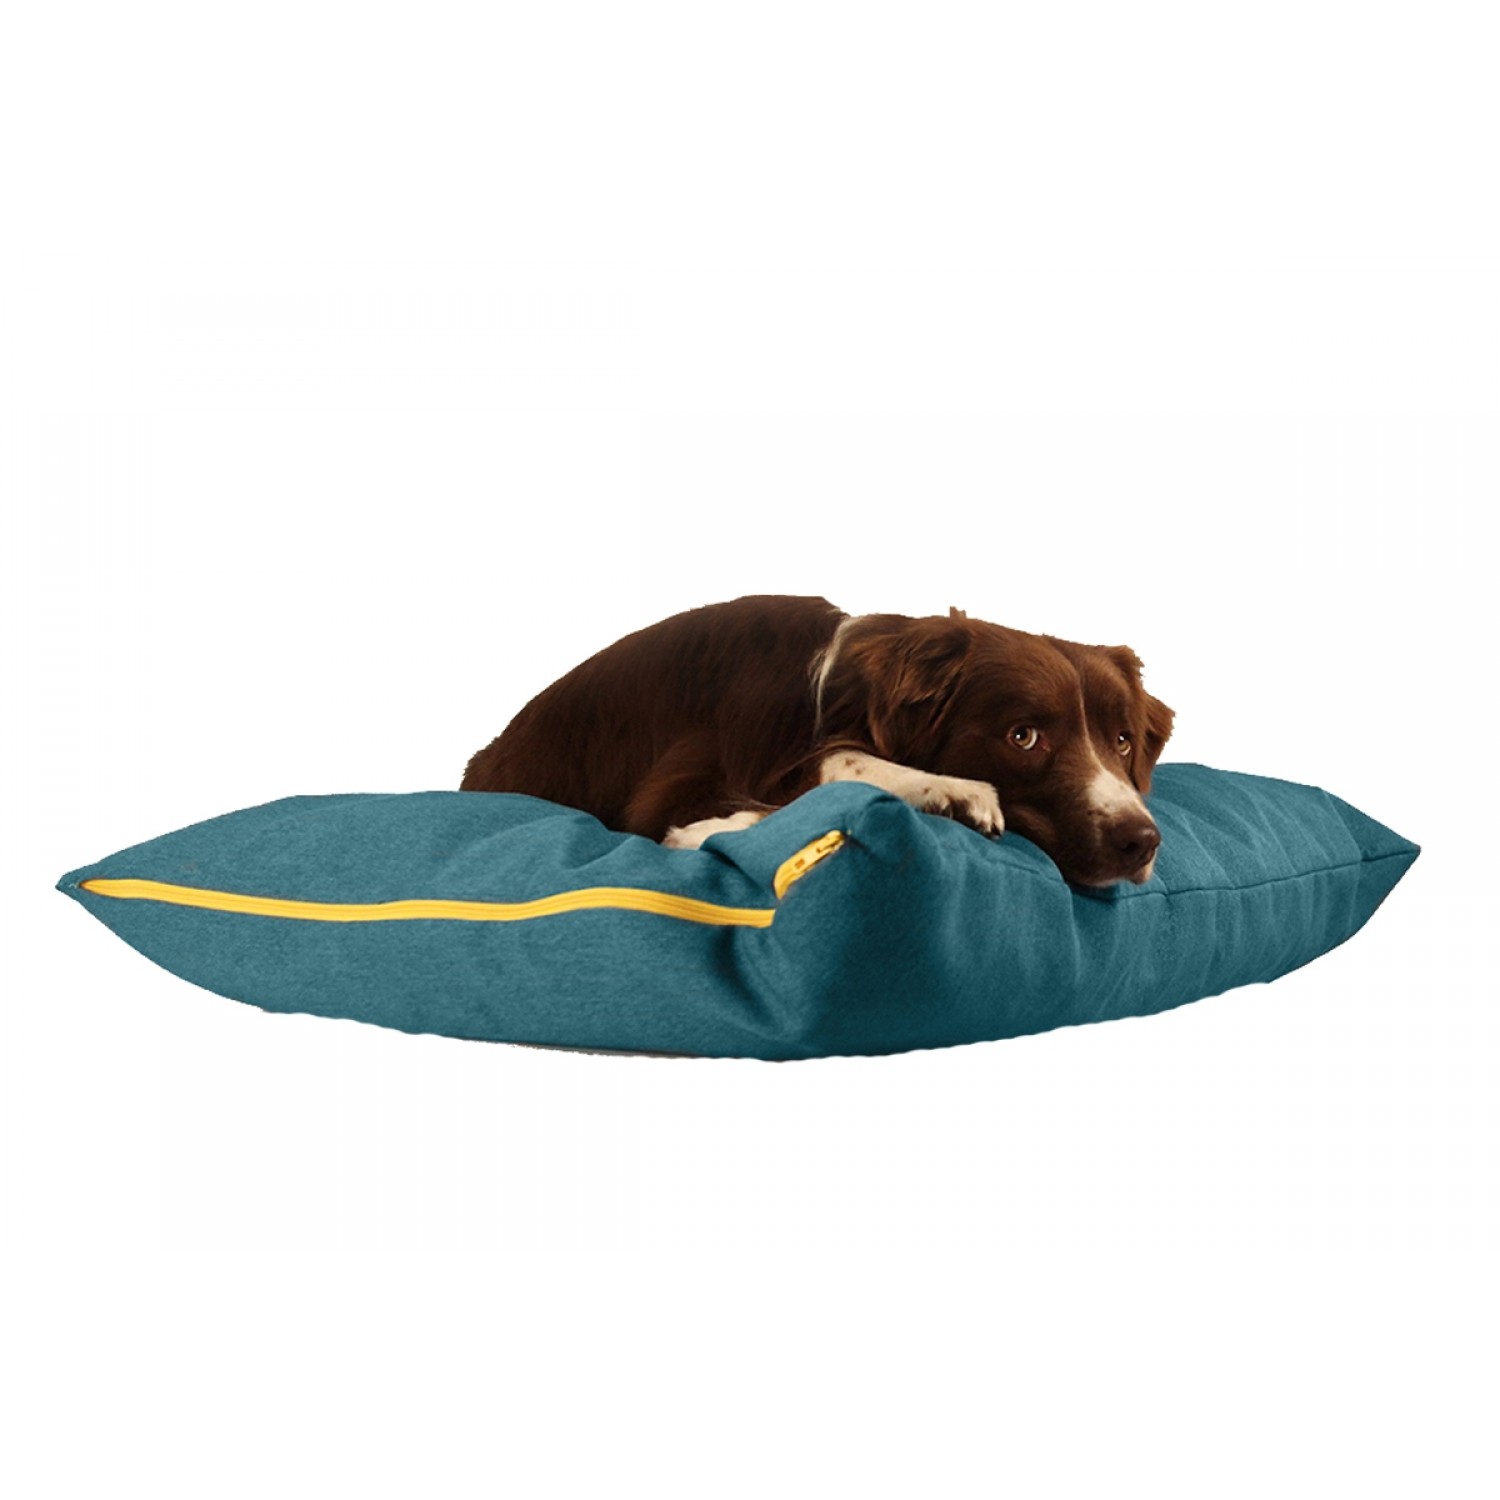 BUDDY Dog Pillow petrol blue, sustainable resting place for dogs